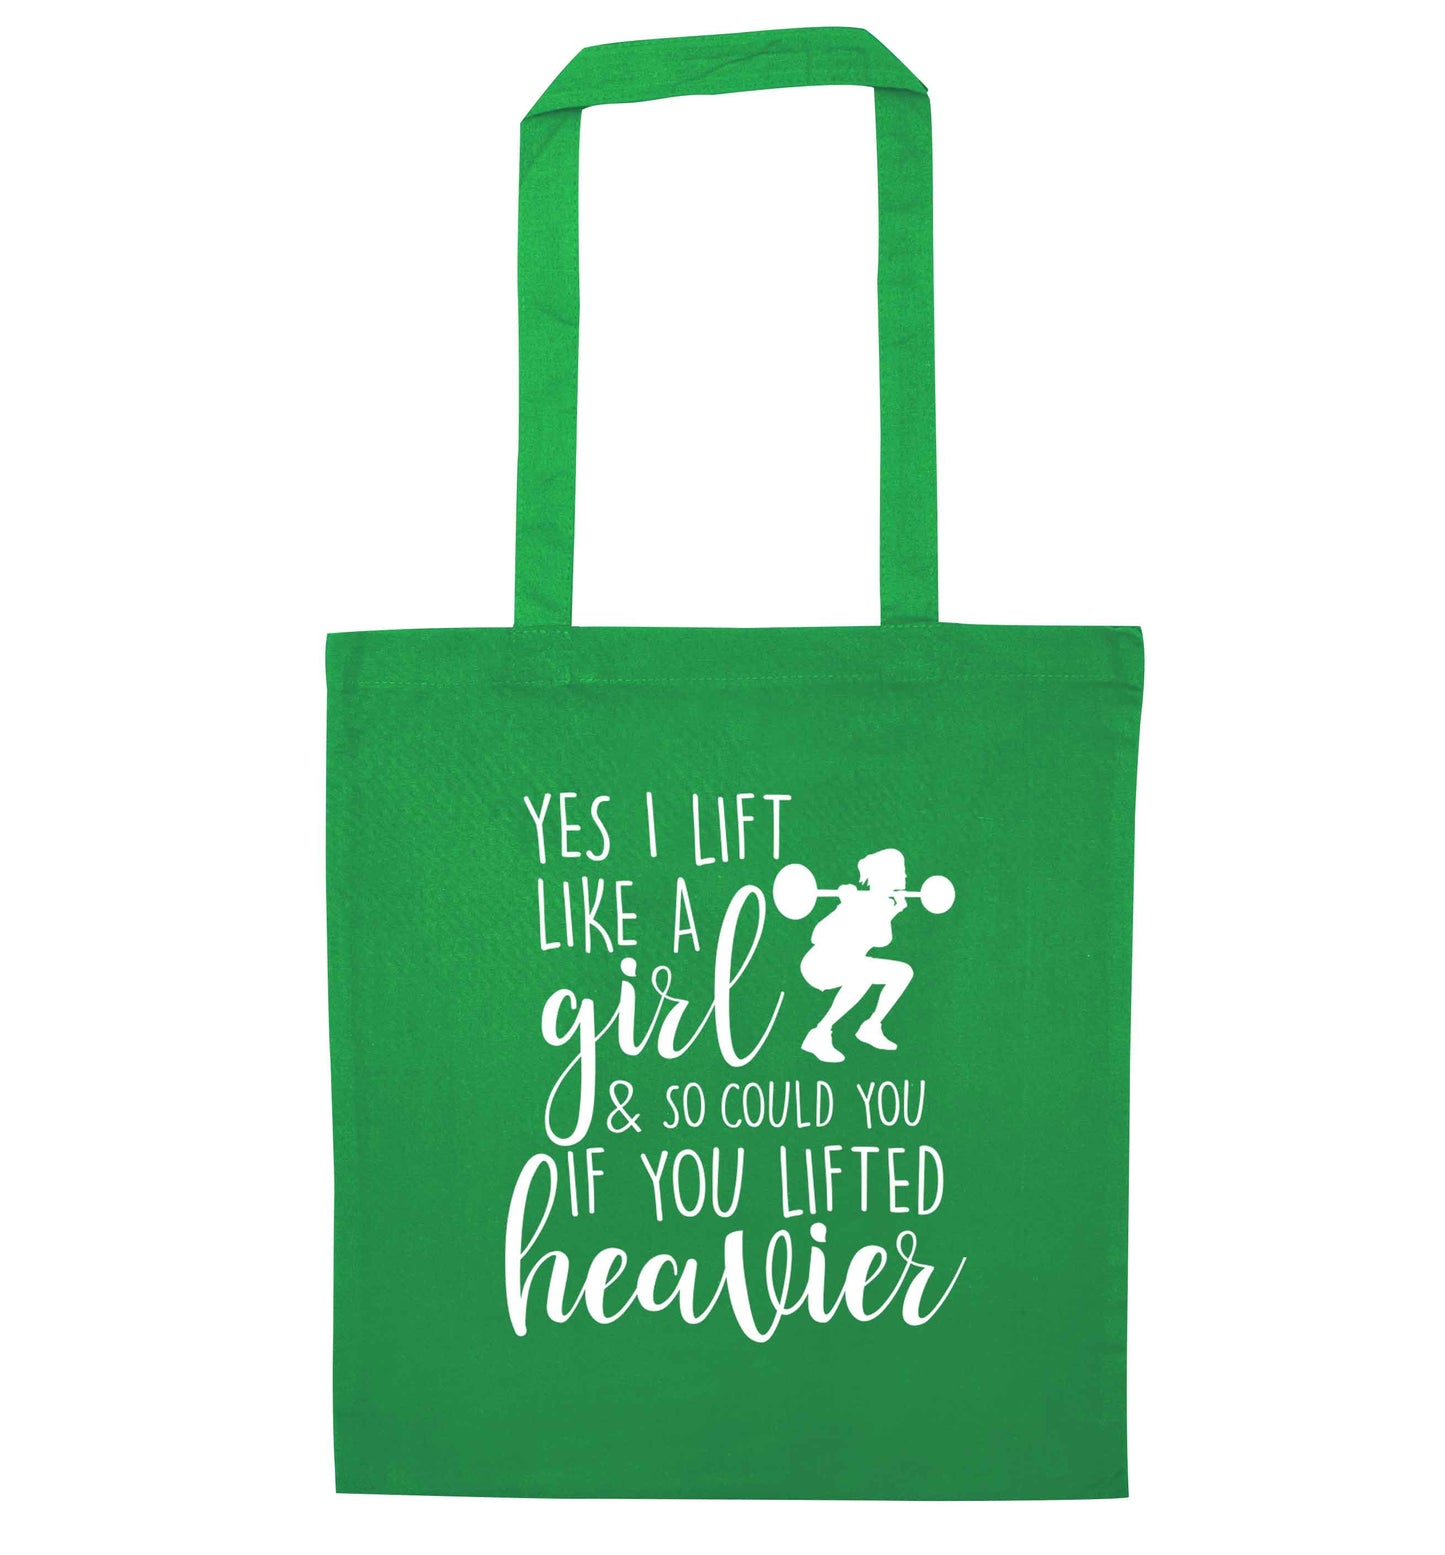 Yes I lift like a girl and so could you if you lifted heavier green tote bag